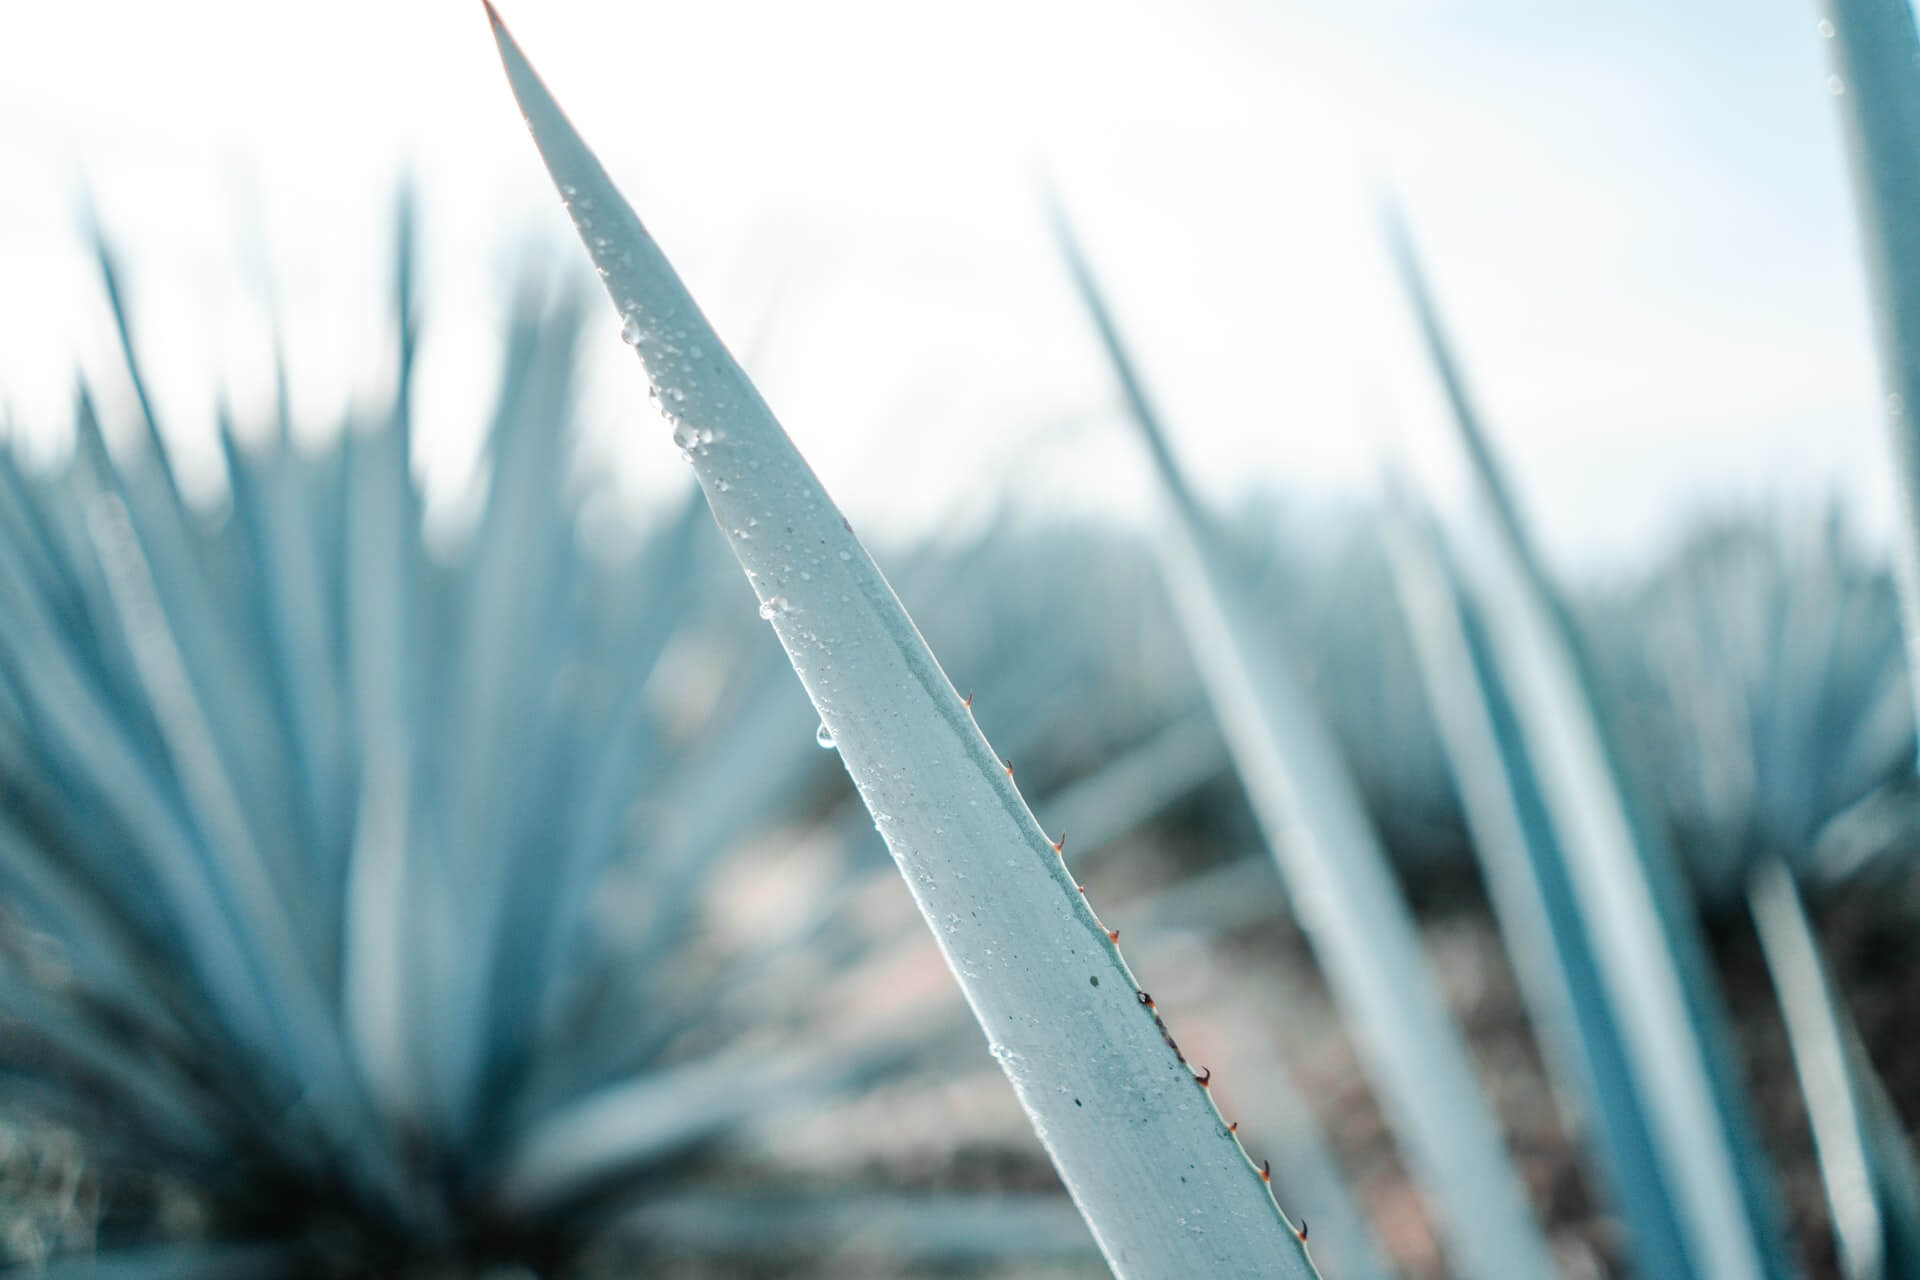 Blue Weber agave plant in Tequila, Mexico